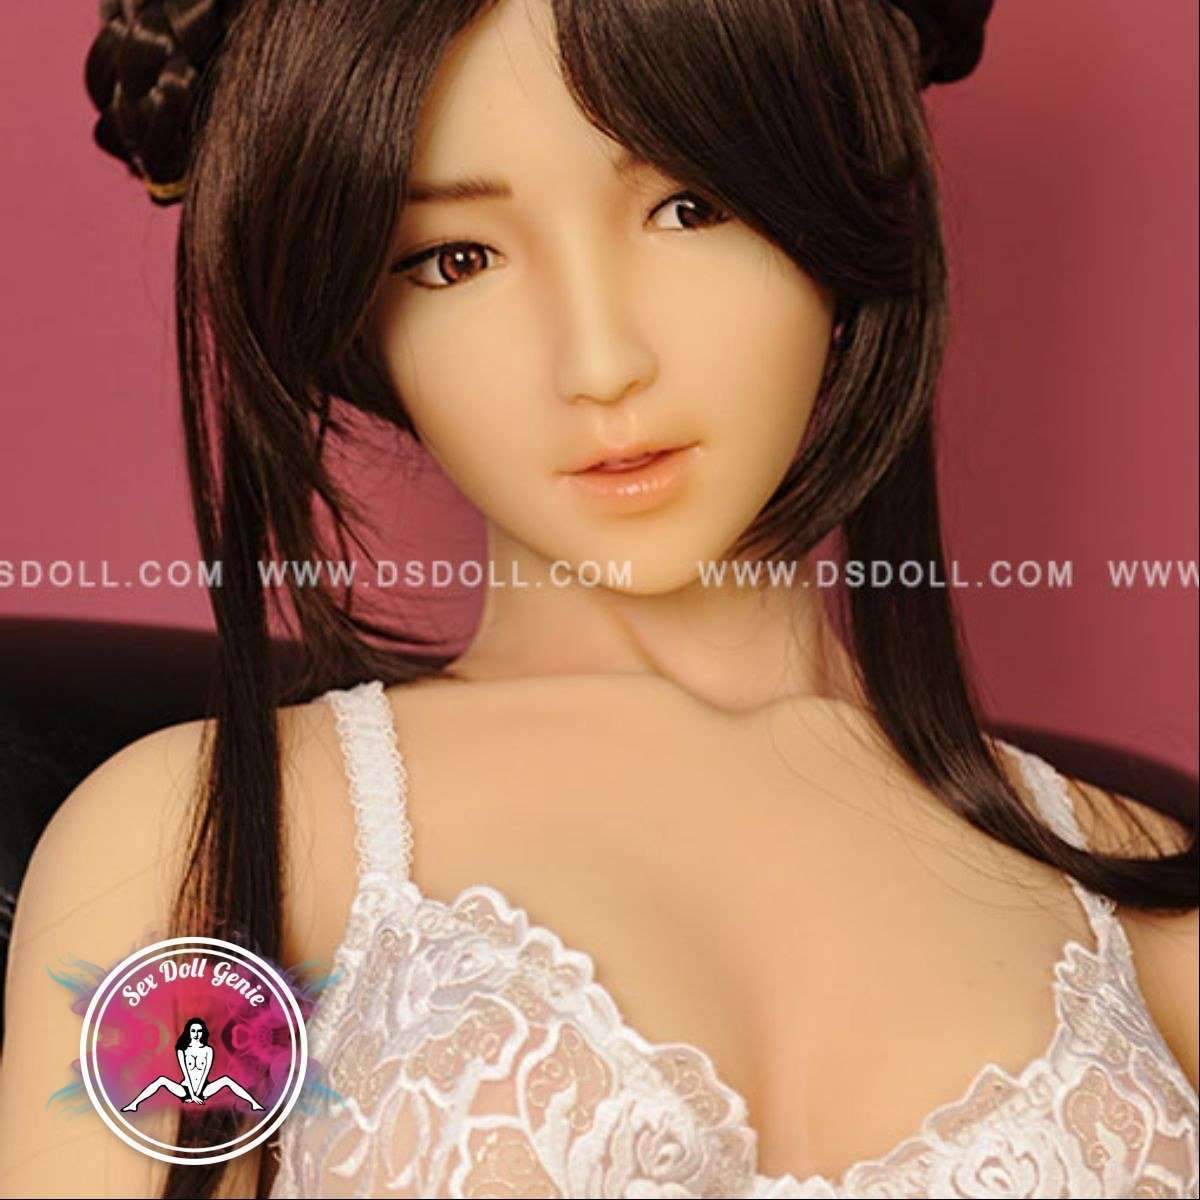 DS Doll - 160cm - Jiaxin Head - Type 1 D Cup Silicone Doll-11